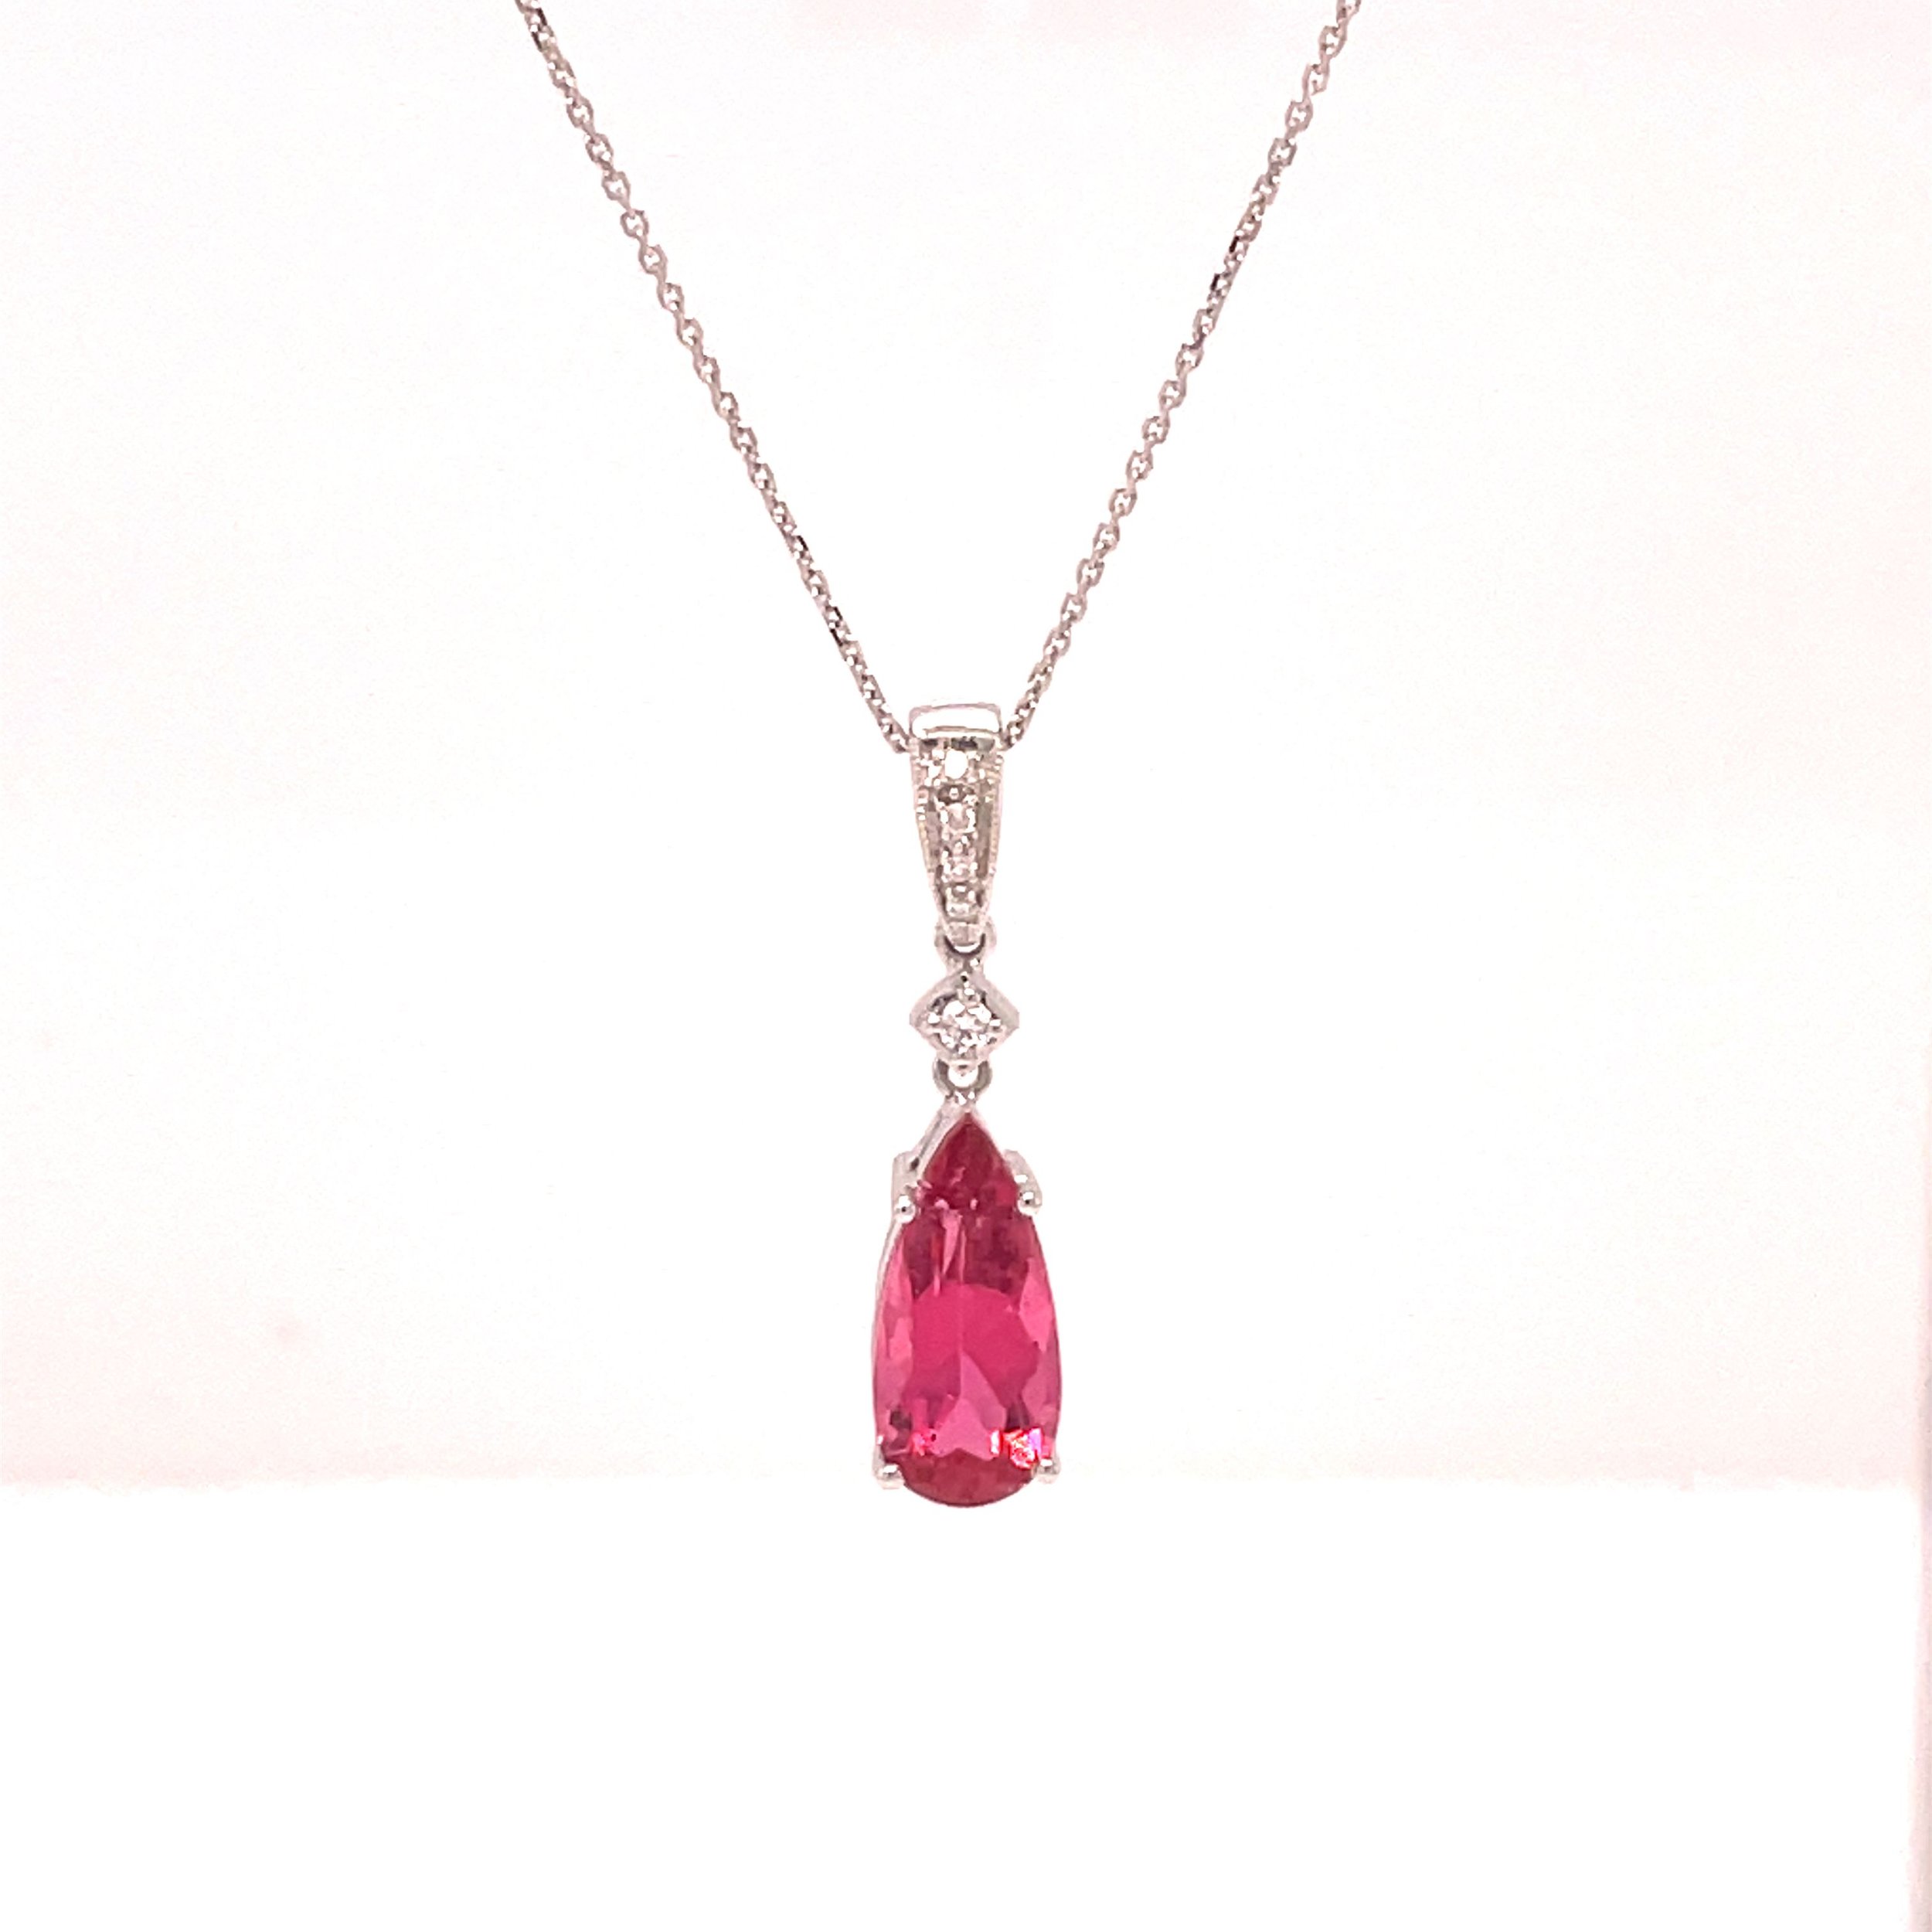 14k White Gold Pink Tourmaline Necklace — Ferris Coin & Jewelry - GIA  Diamonds Vintage Jewelry U.S Coins - Buy and Sell Rare And Unique American  Coins